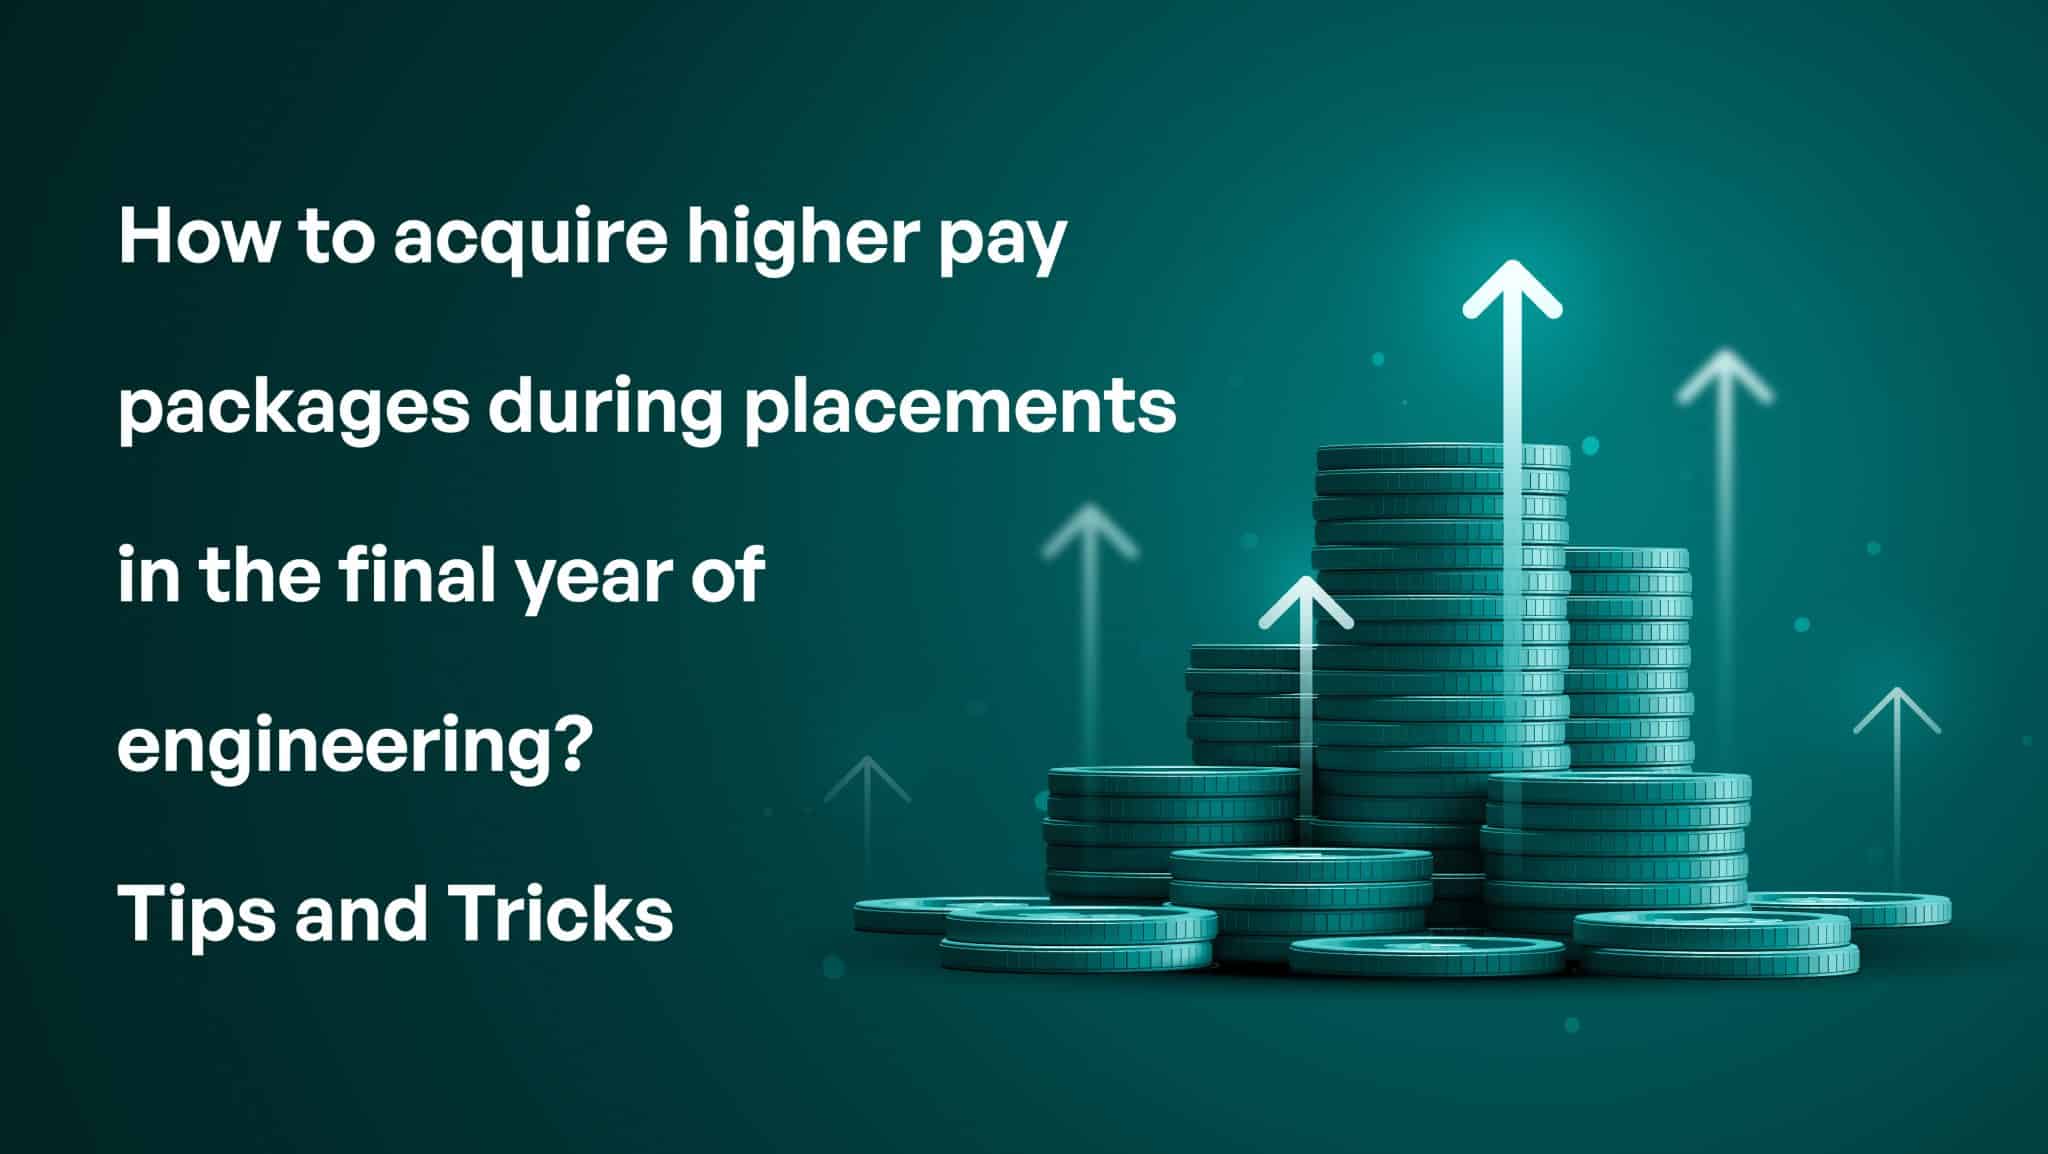 HOW TO ACQUIRE HIGHER PAY PACKAGES DURING PLACEMENTS IN THE FINAL YEAR OF ENGINEERING? -TIPS AND TRICKS